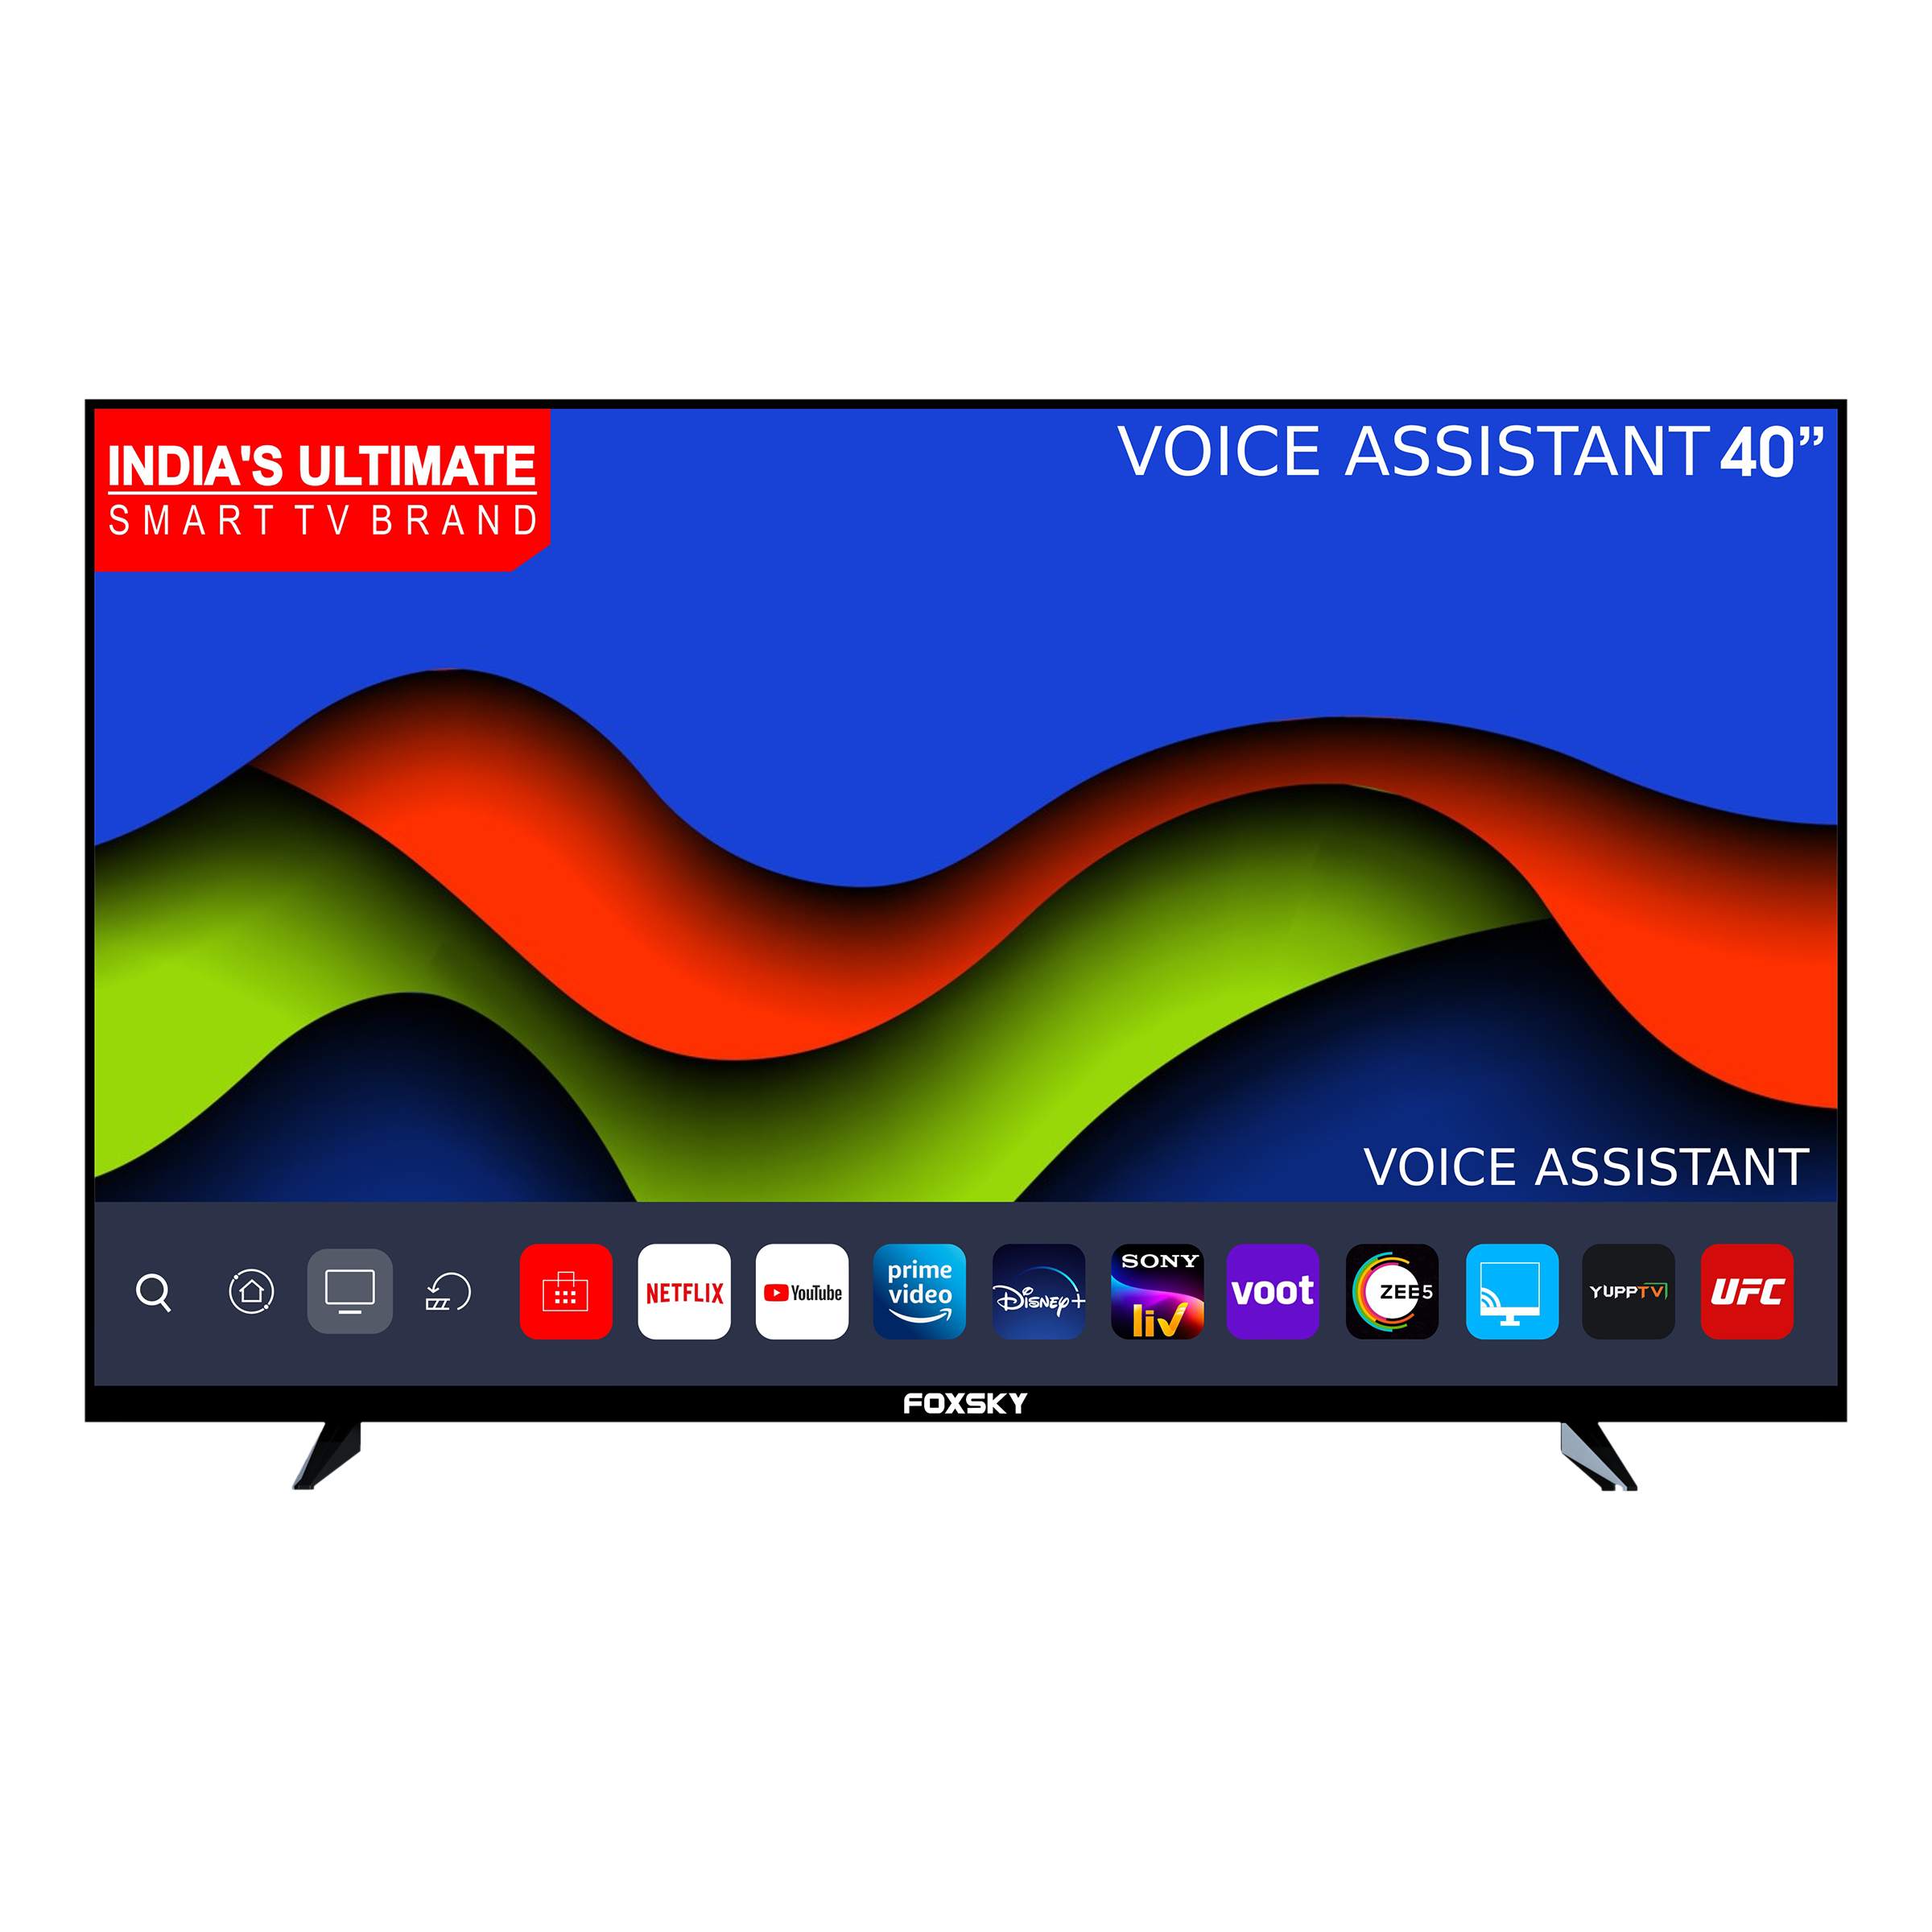 Foxsky 101 cm (40 inch) Full HD LED Smart Android TV with Google Voice Assistant (2021 model)_1